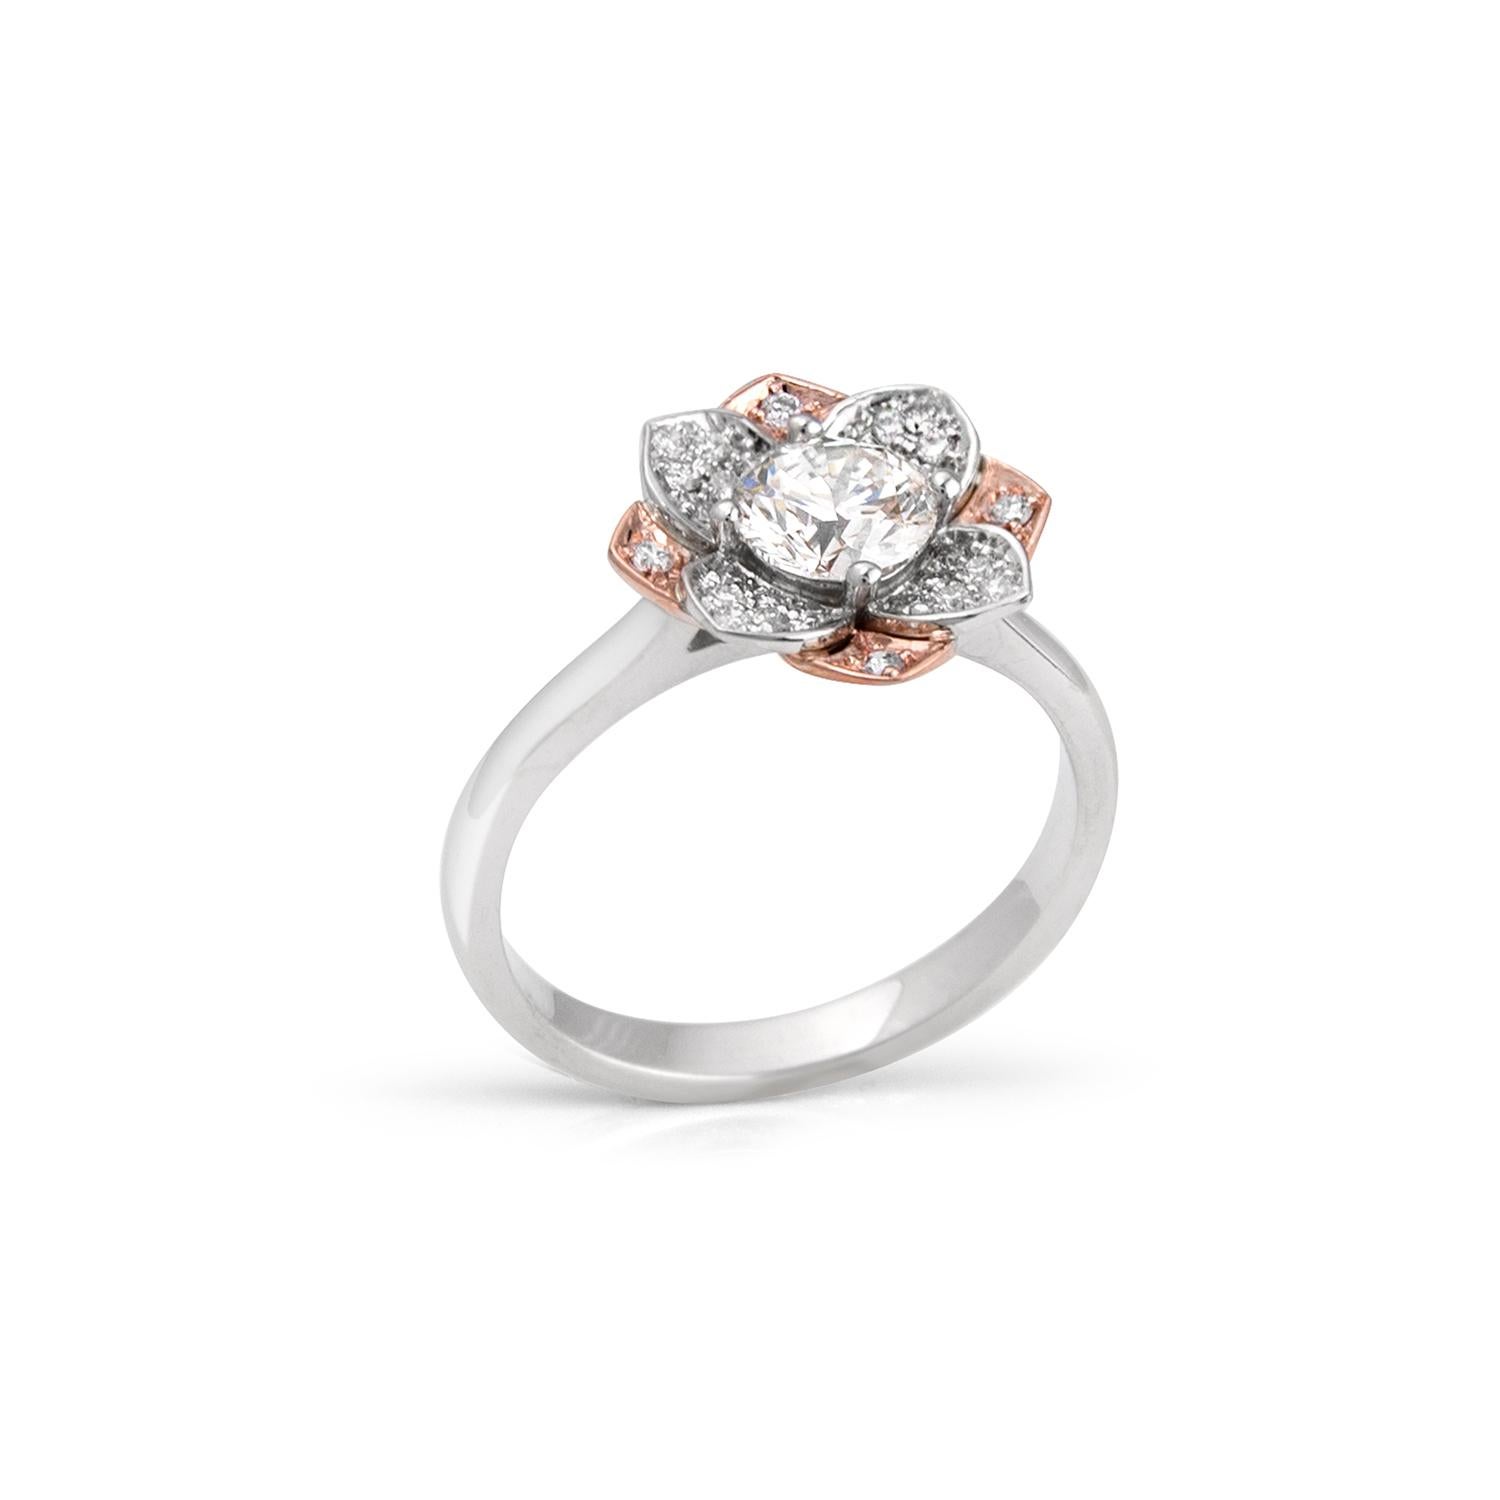 Flower ring in 14kt rose and white gold featuring a 0.70ct K VS1 round brilliant center diamond and pave' set petals with 28 diamonds equal to 0.19ct total. Ring size 6 1/2. Sizing up or down 2 sizes included in price. GIA number 2177065899.